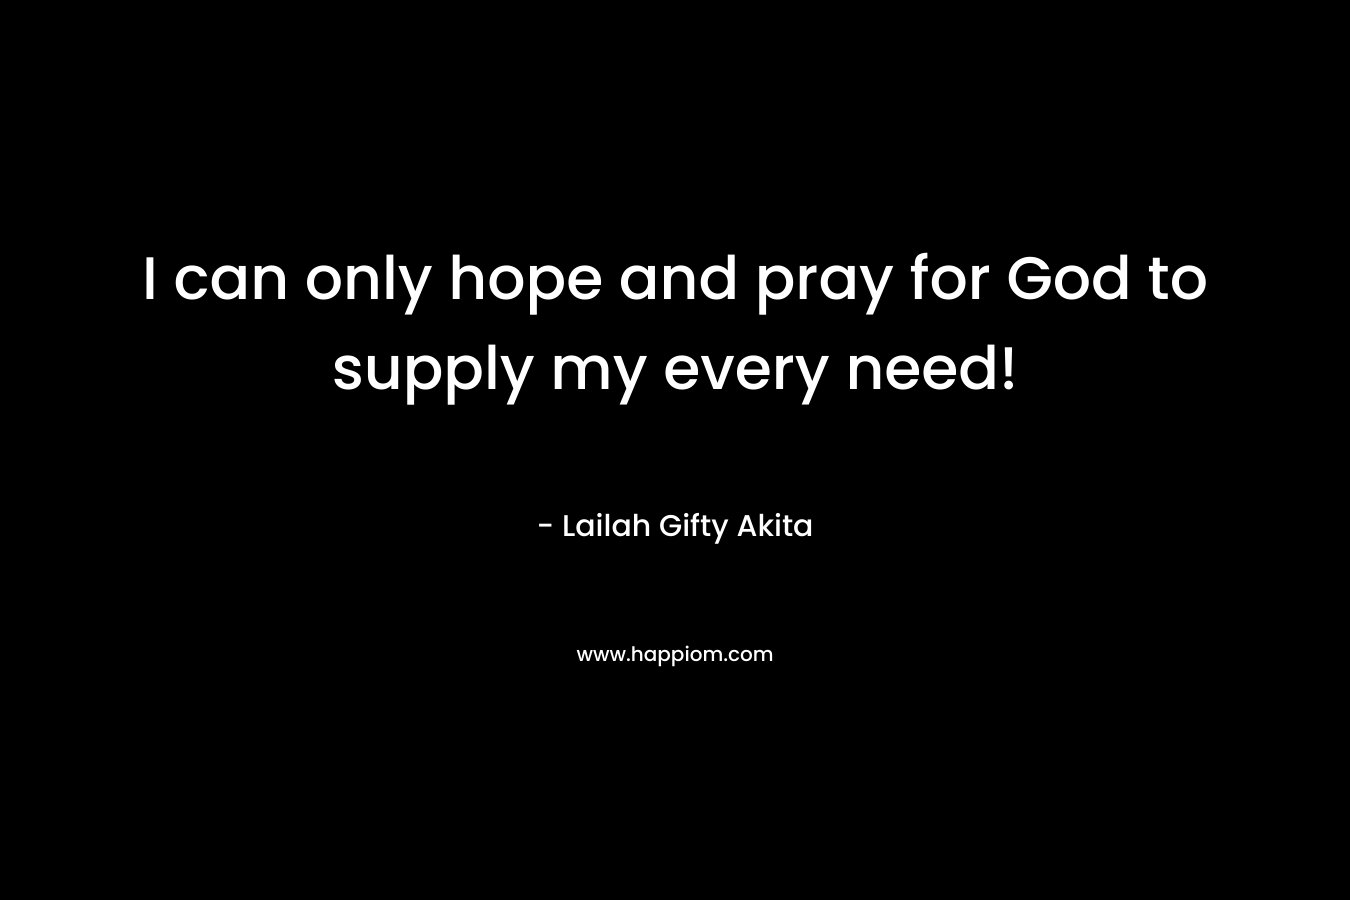 I can only hope and pray for God to supply my every need!